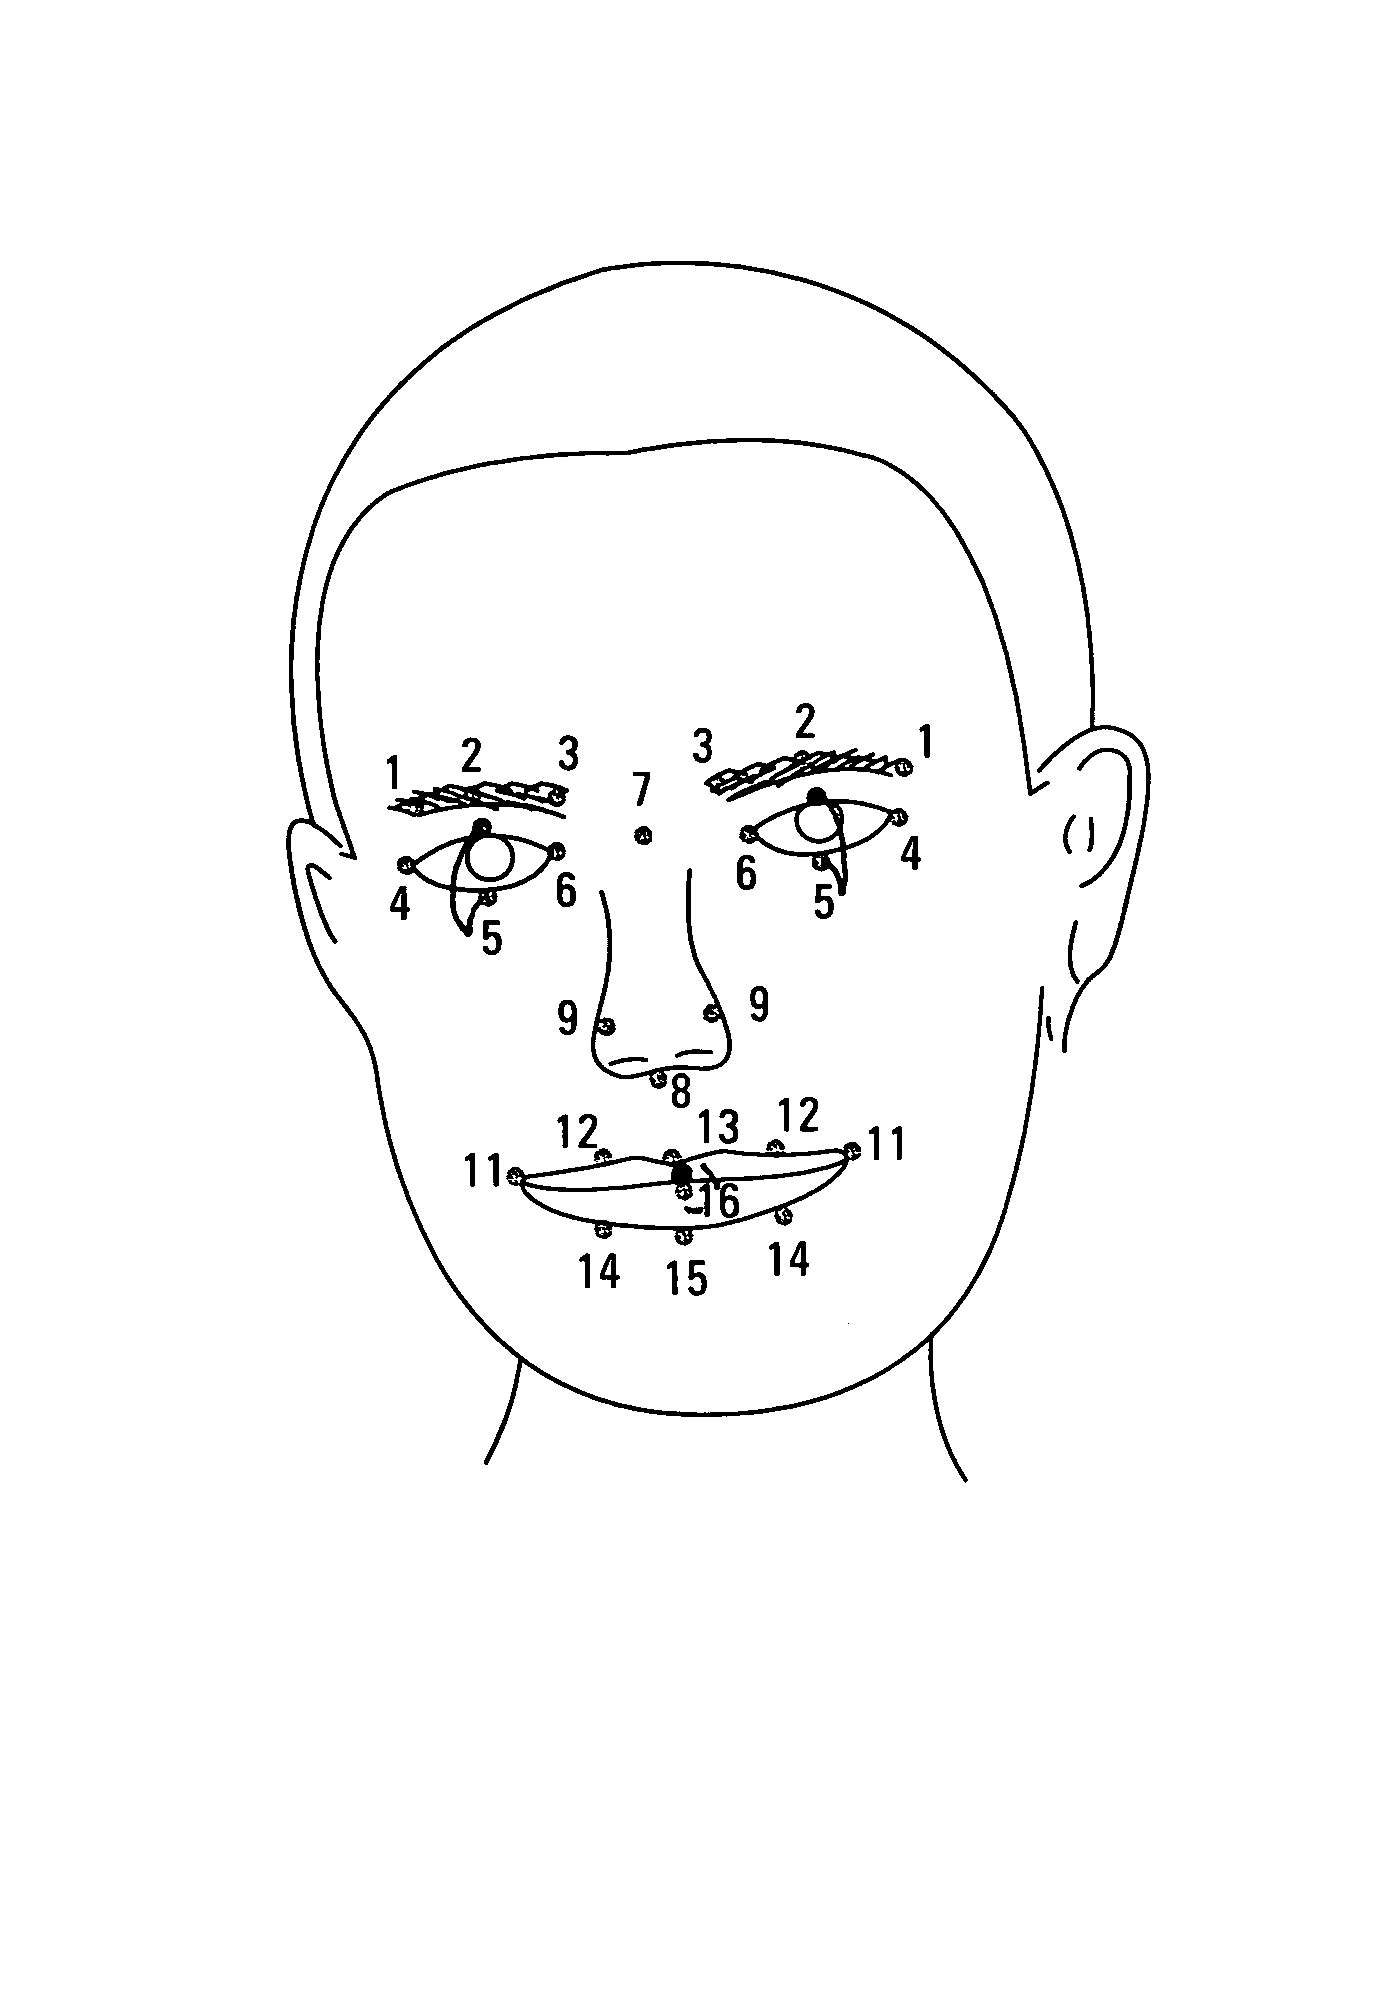 Computerized method of assessing consumer reaction to a business stimulus employing facial coding